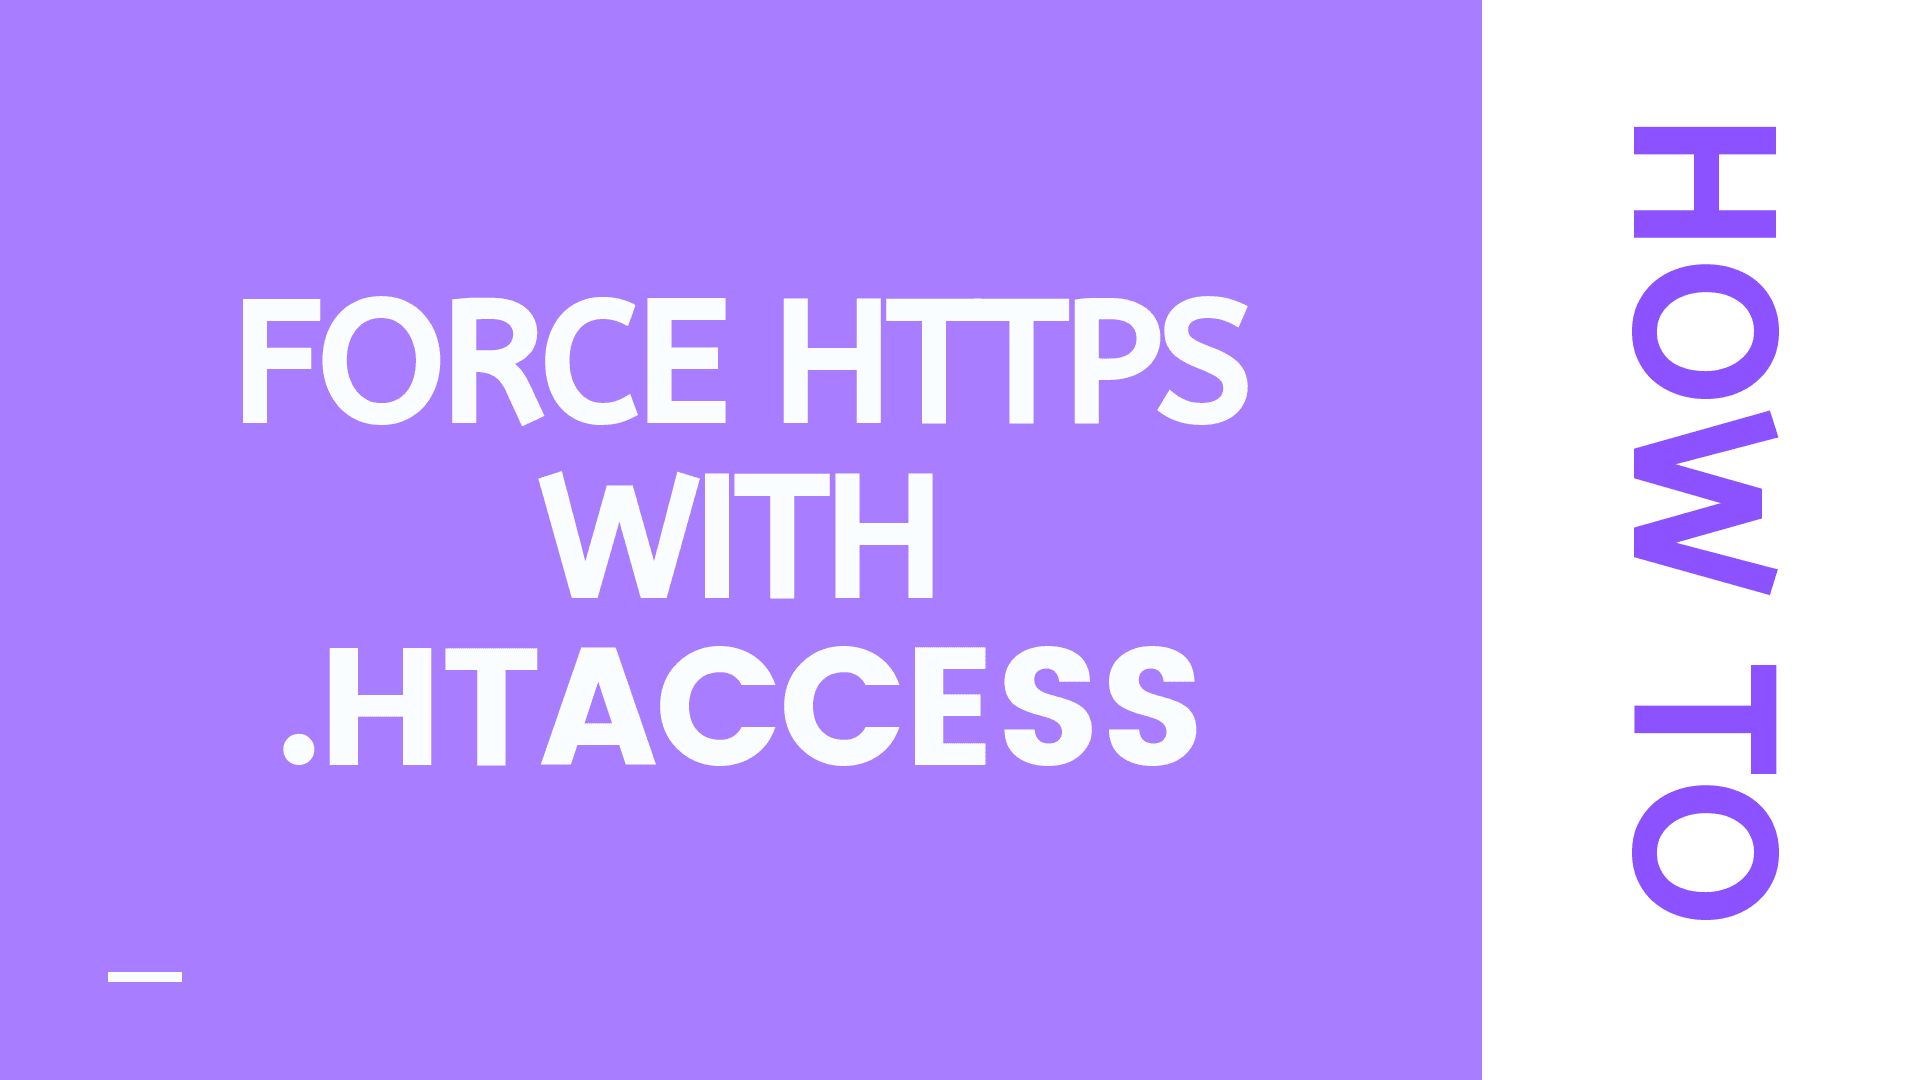 How to Force HTTPS With the .HTACCESS File